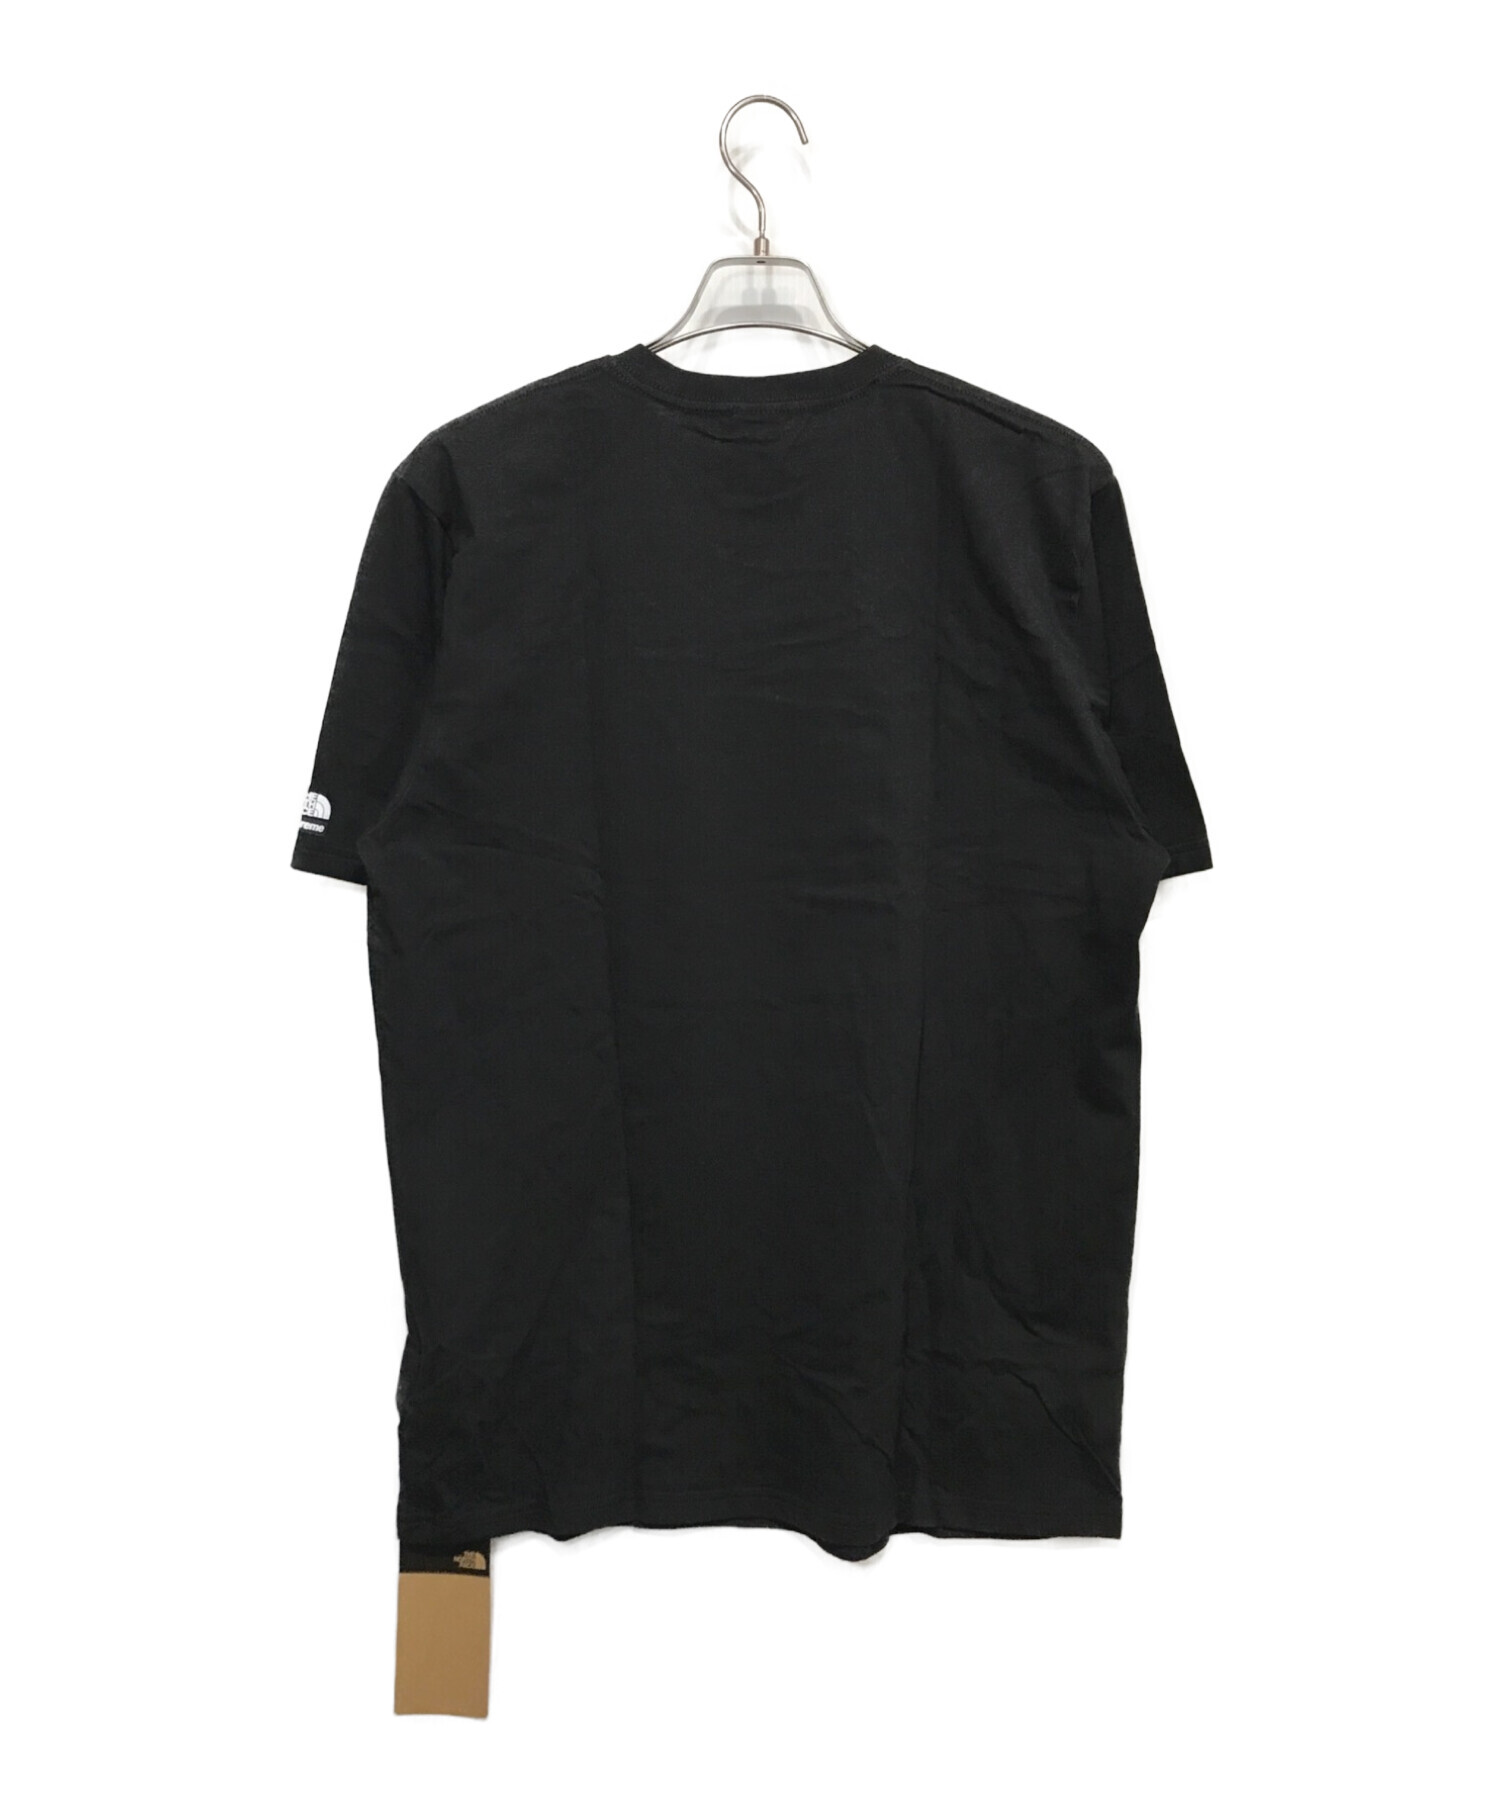 supreme the north face Sketch tee blackメンズ